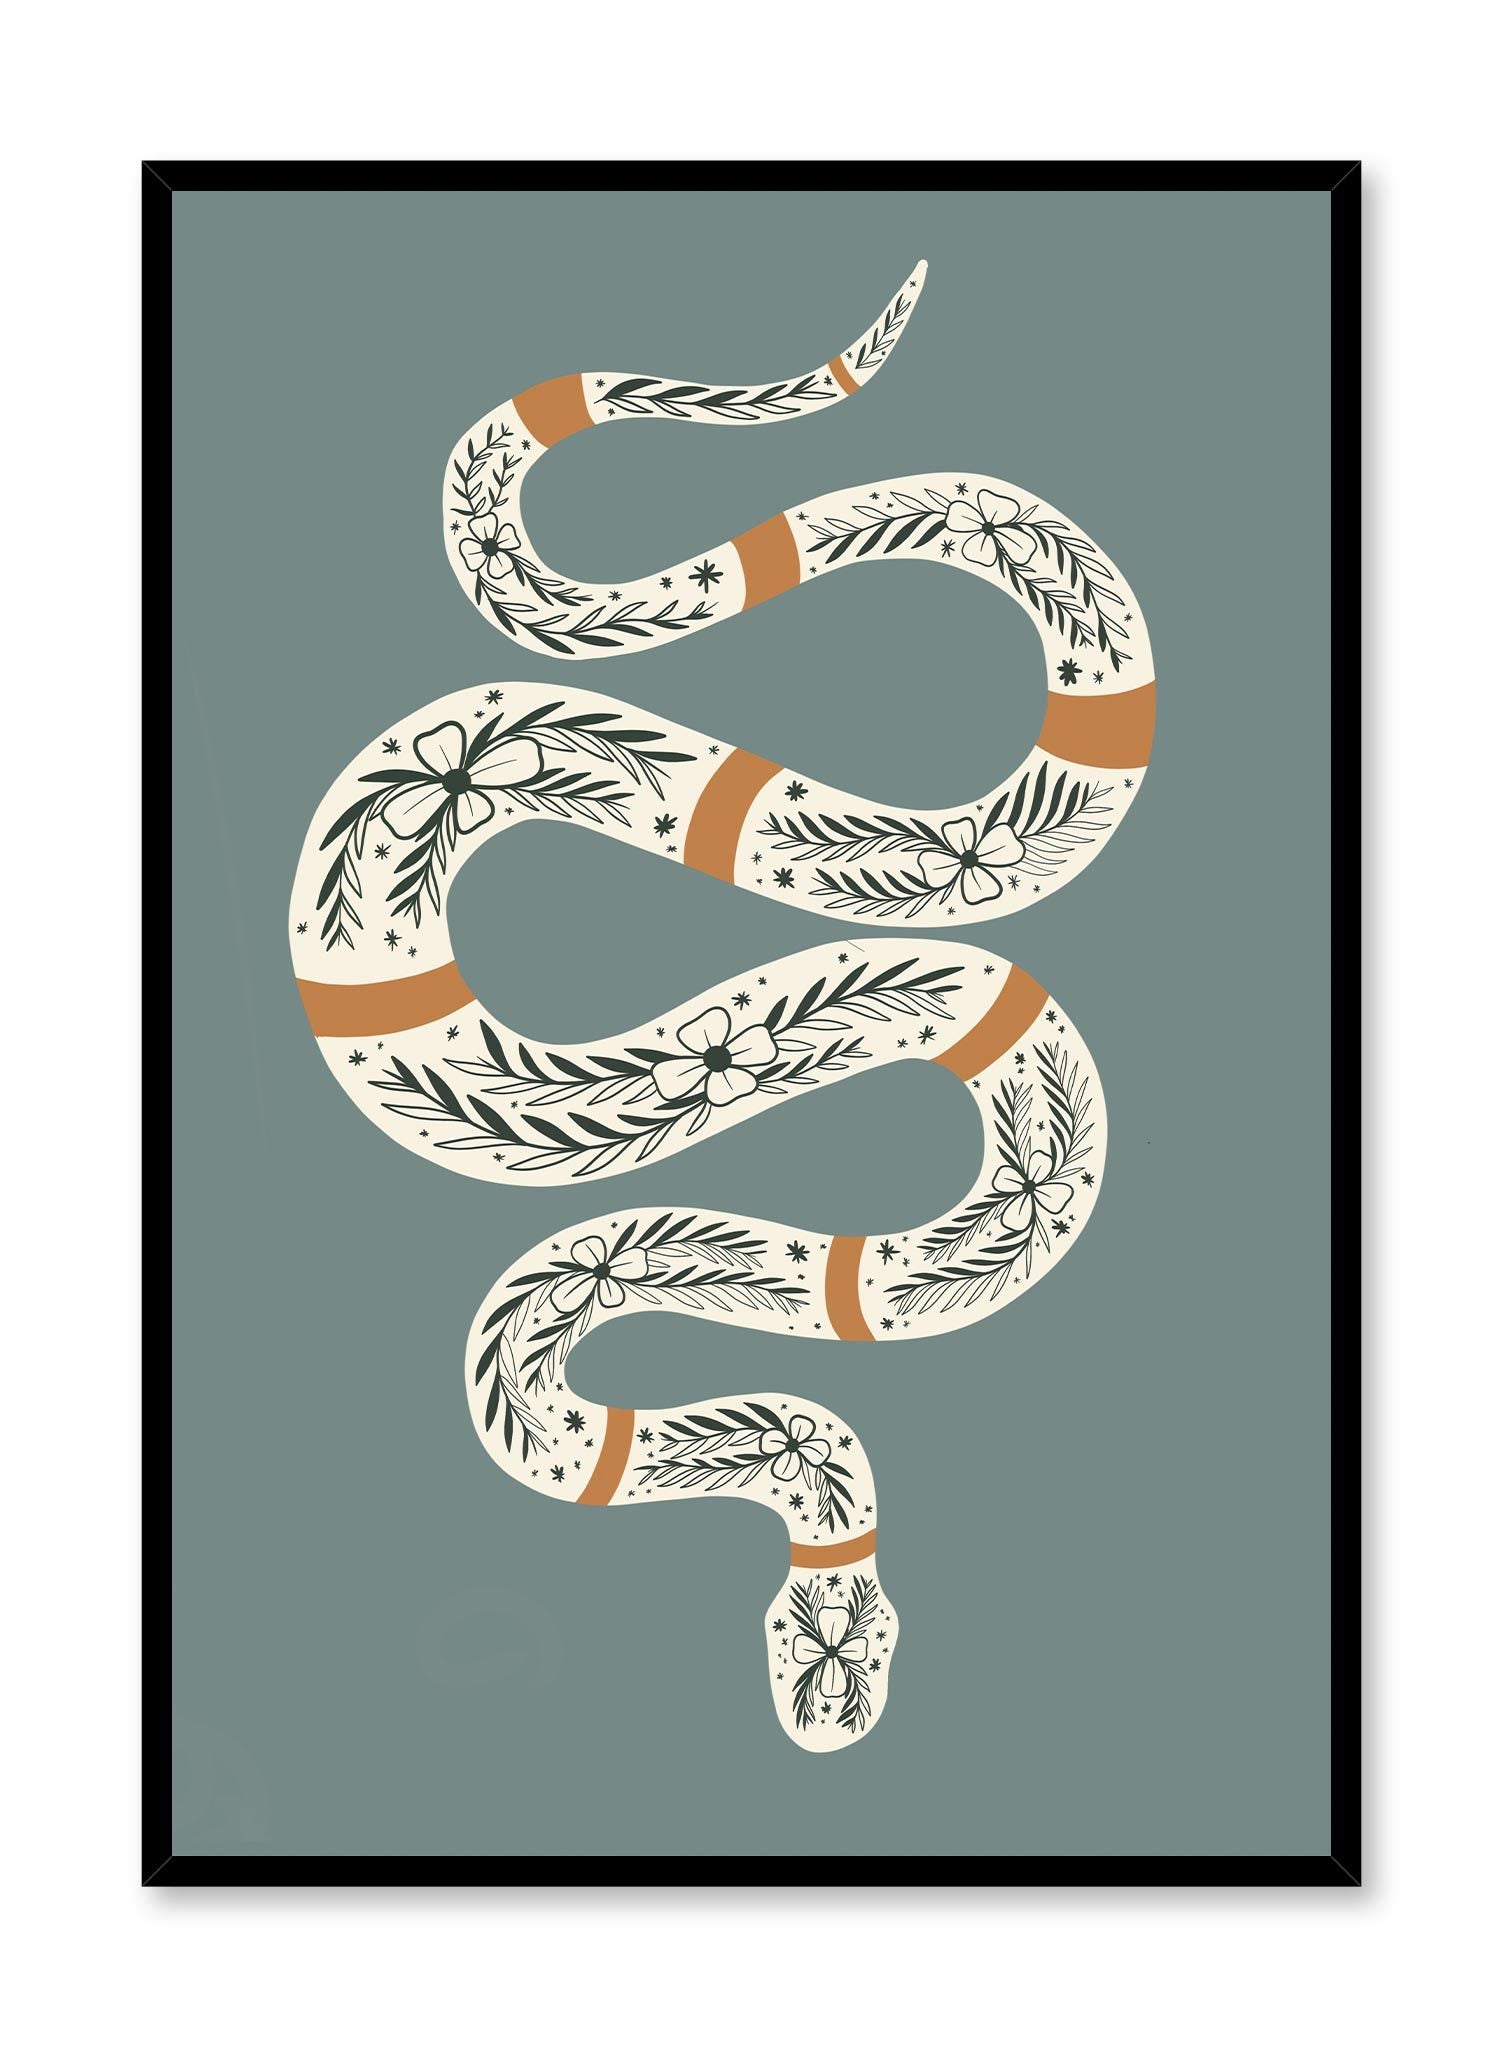 Ornate Snake is a minimalist illustration the top view of a snake with orange stripes and a unique pattern of flowers on its back by Opposite Wall.